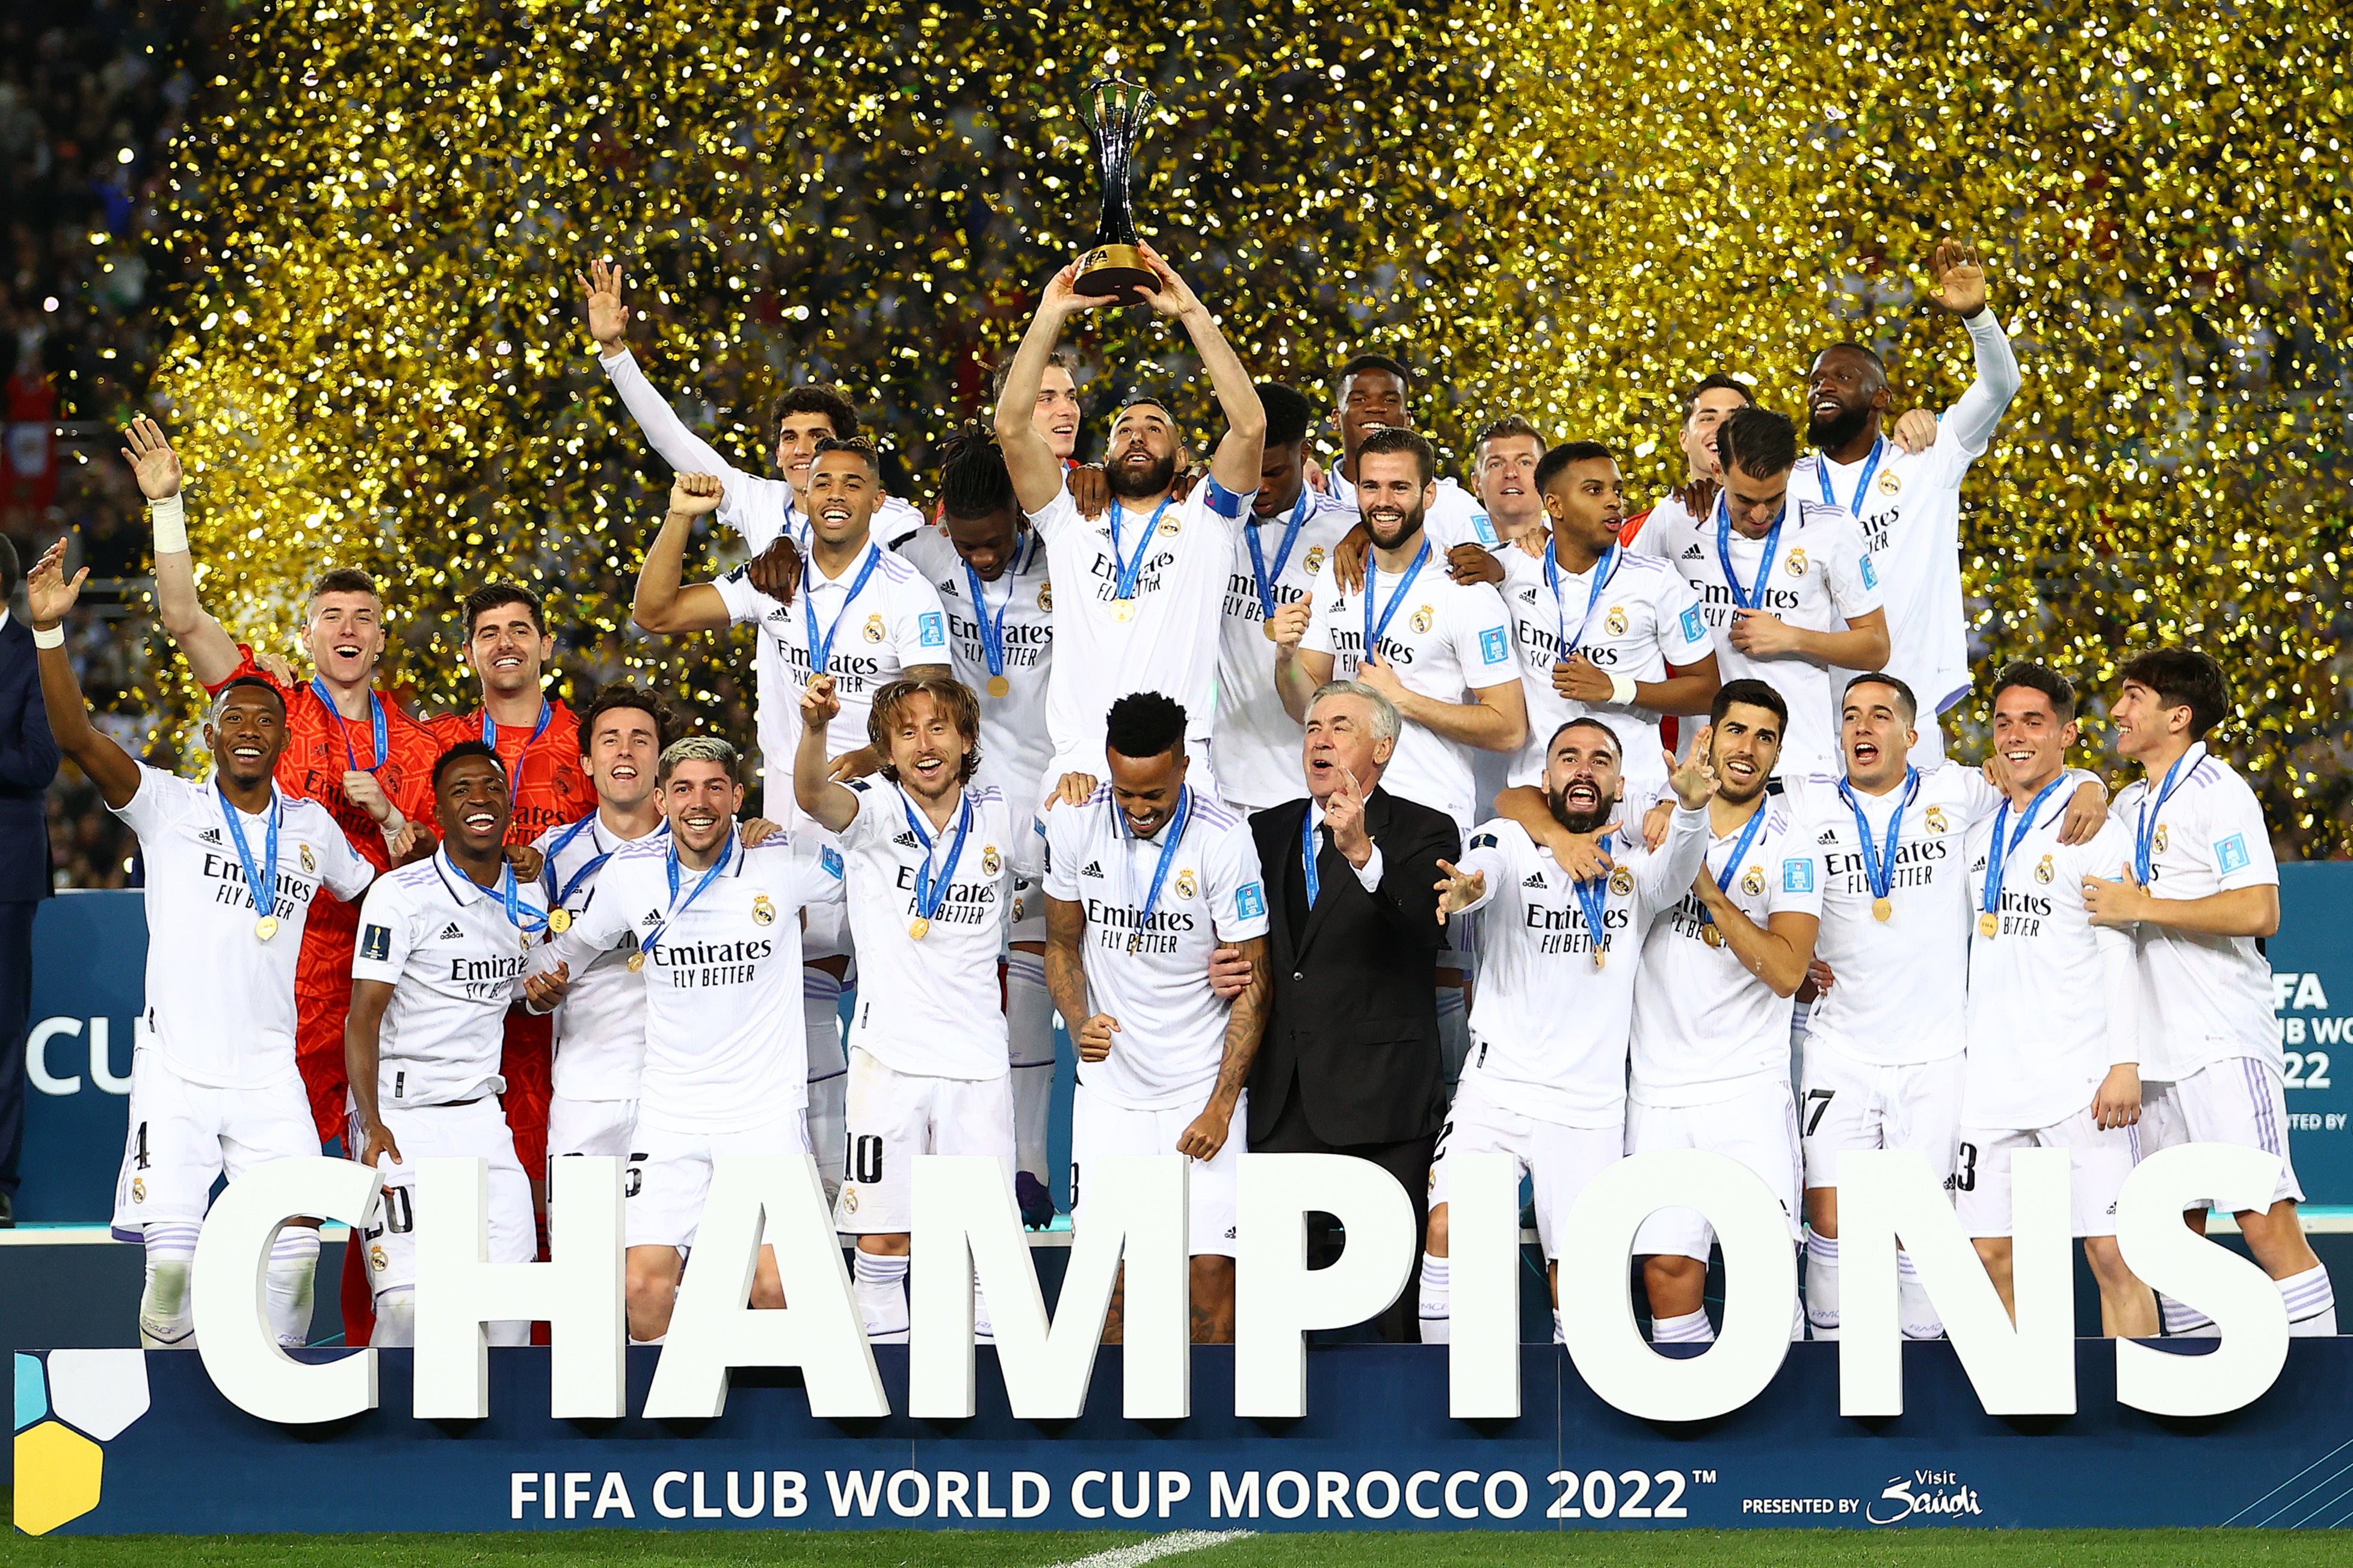 FIFA Club World Cup 2023 Live Stream: How to Watch and When do